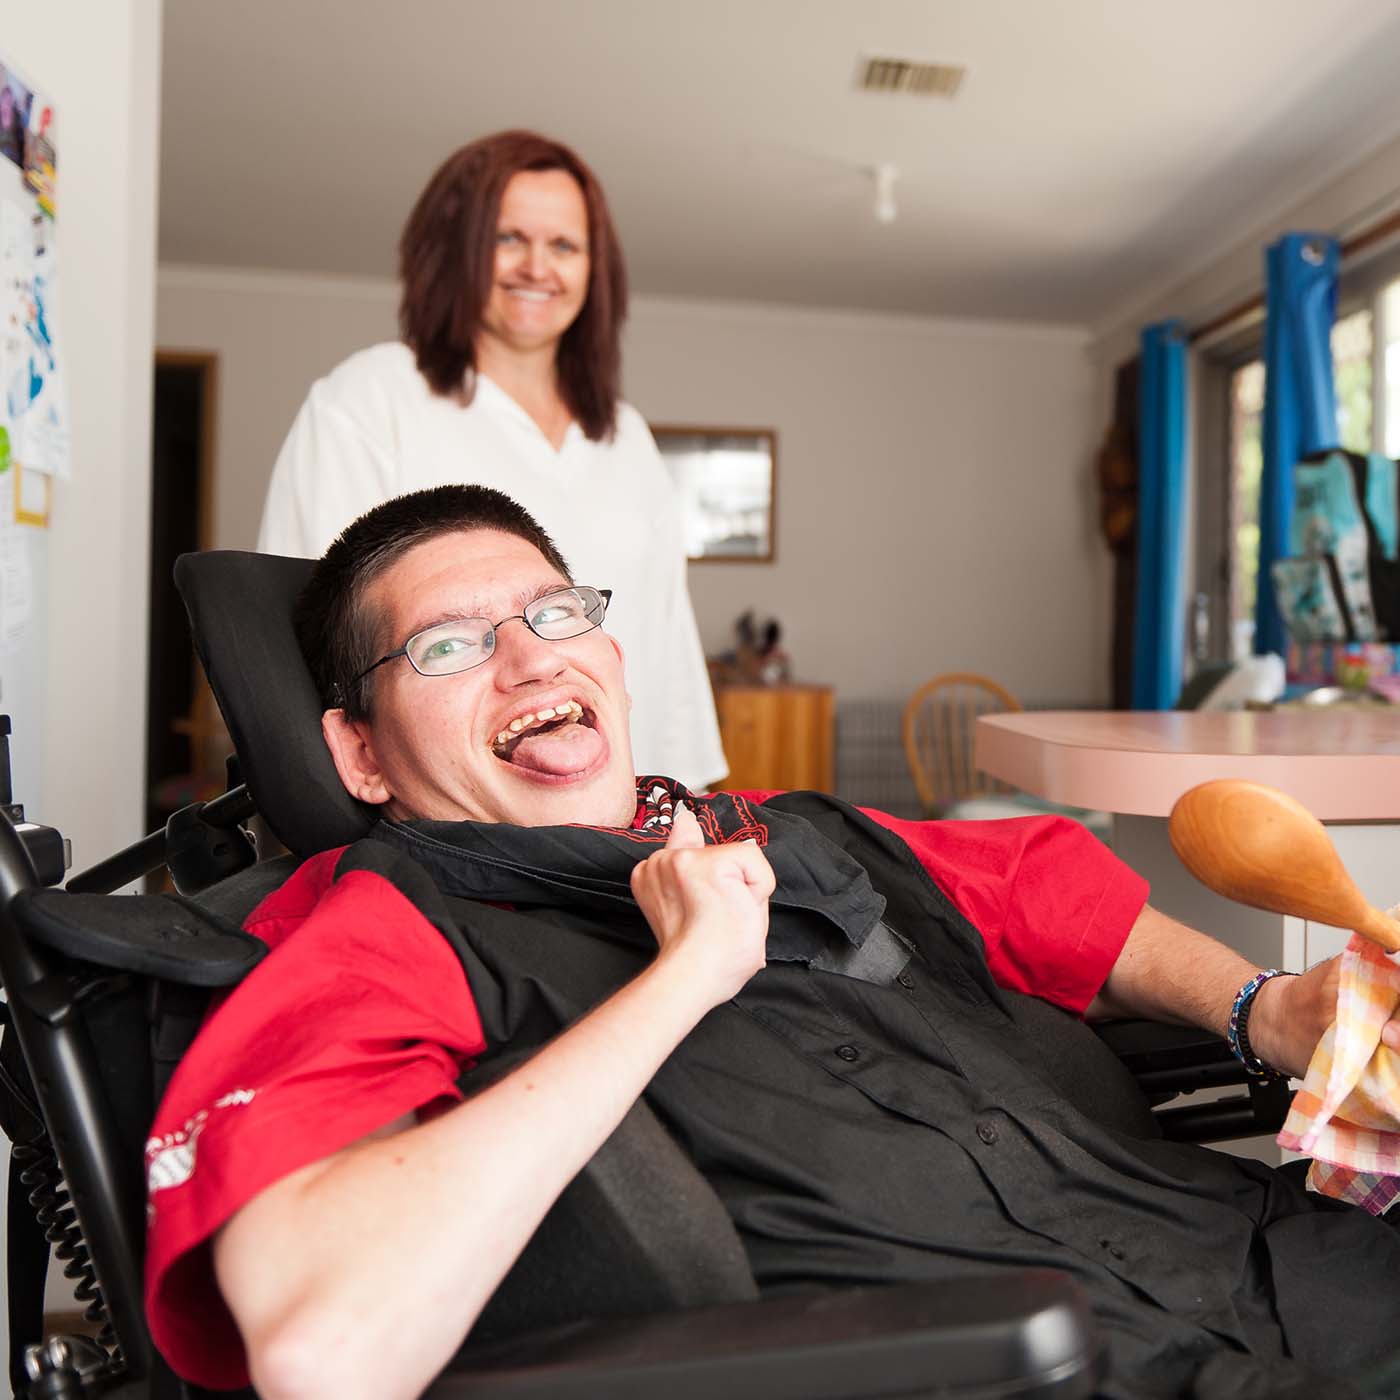 young man with intellectual and physical disability smiling and loving life in his group home